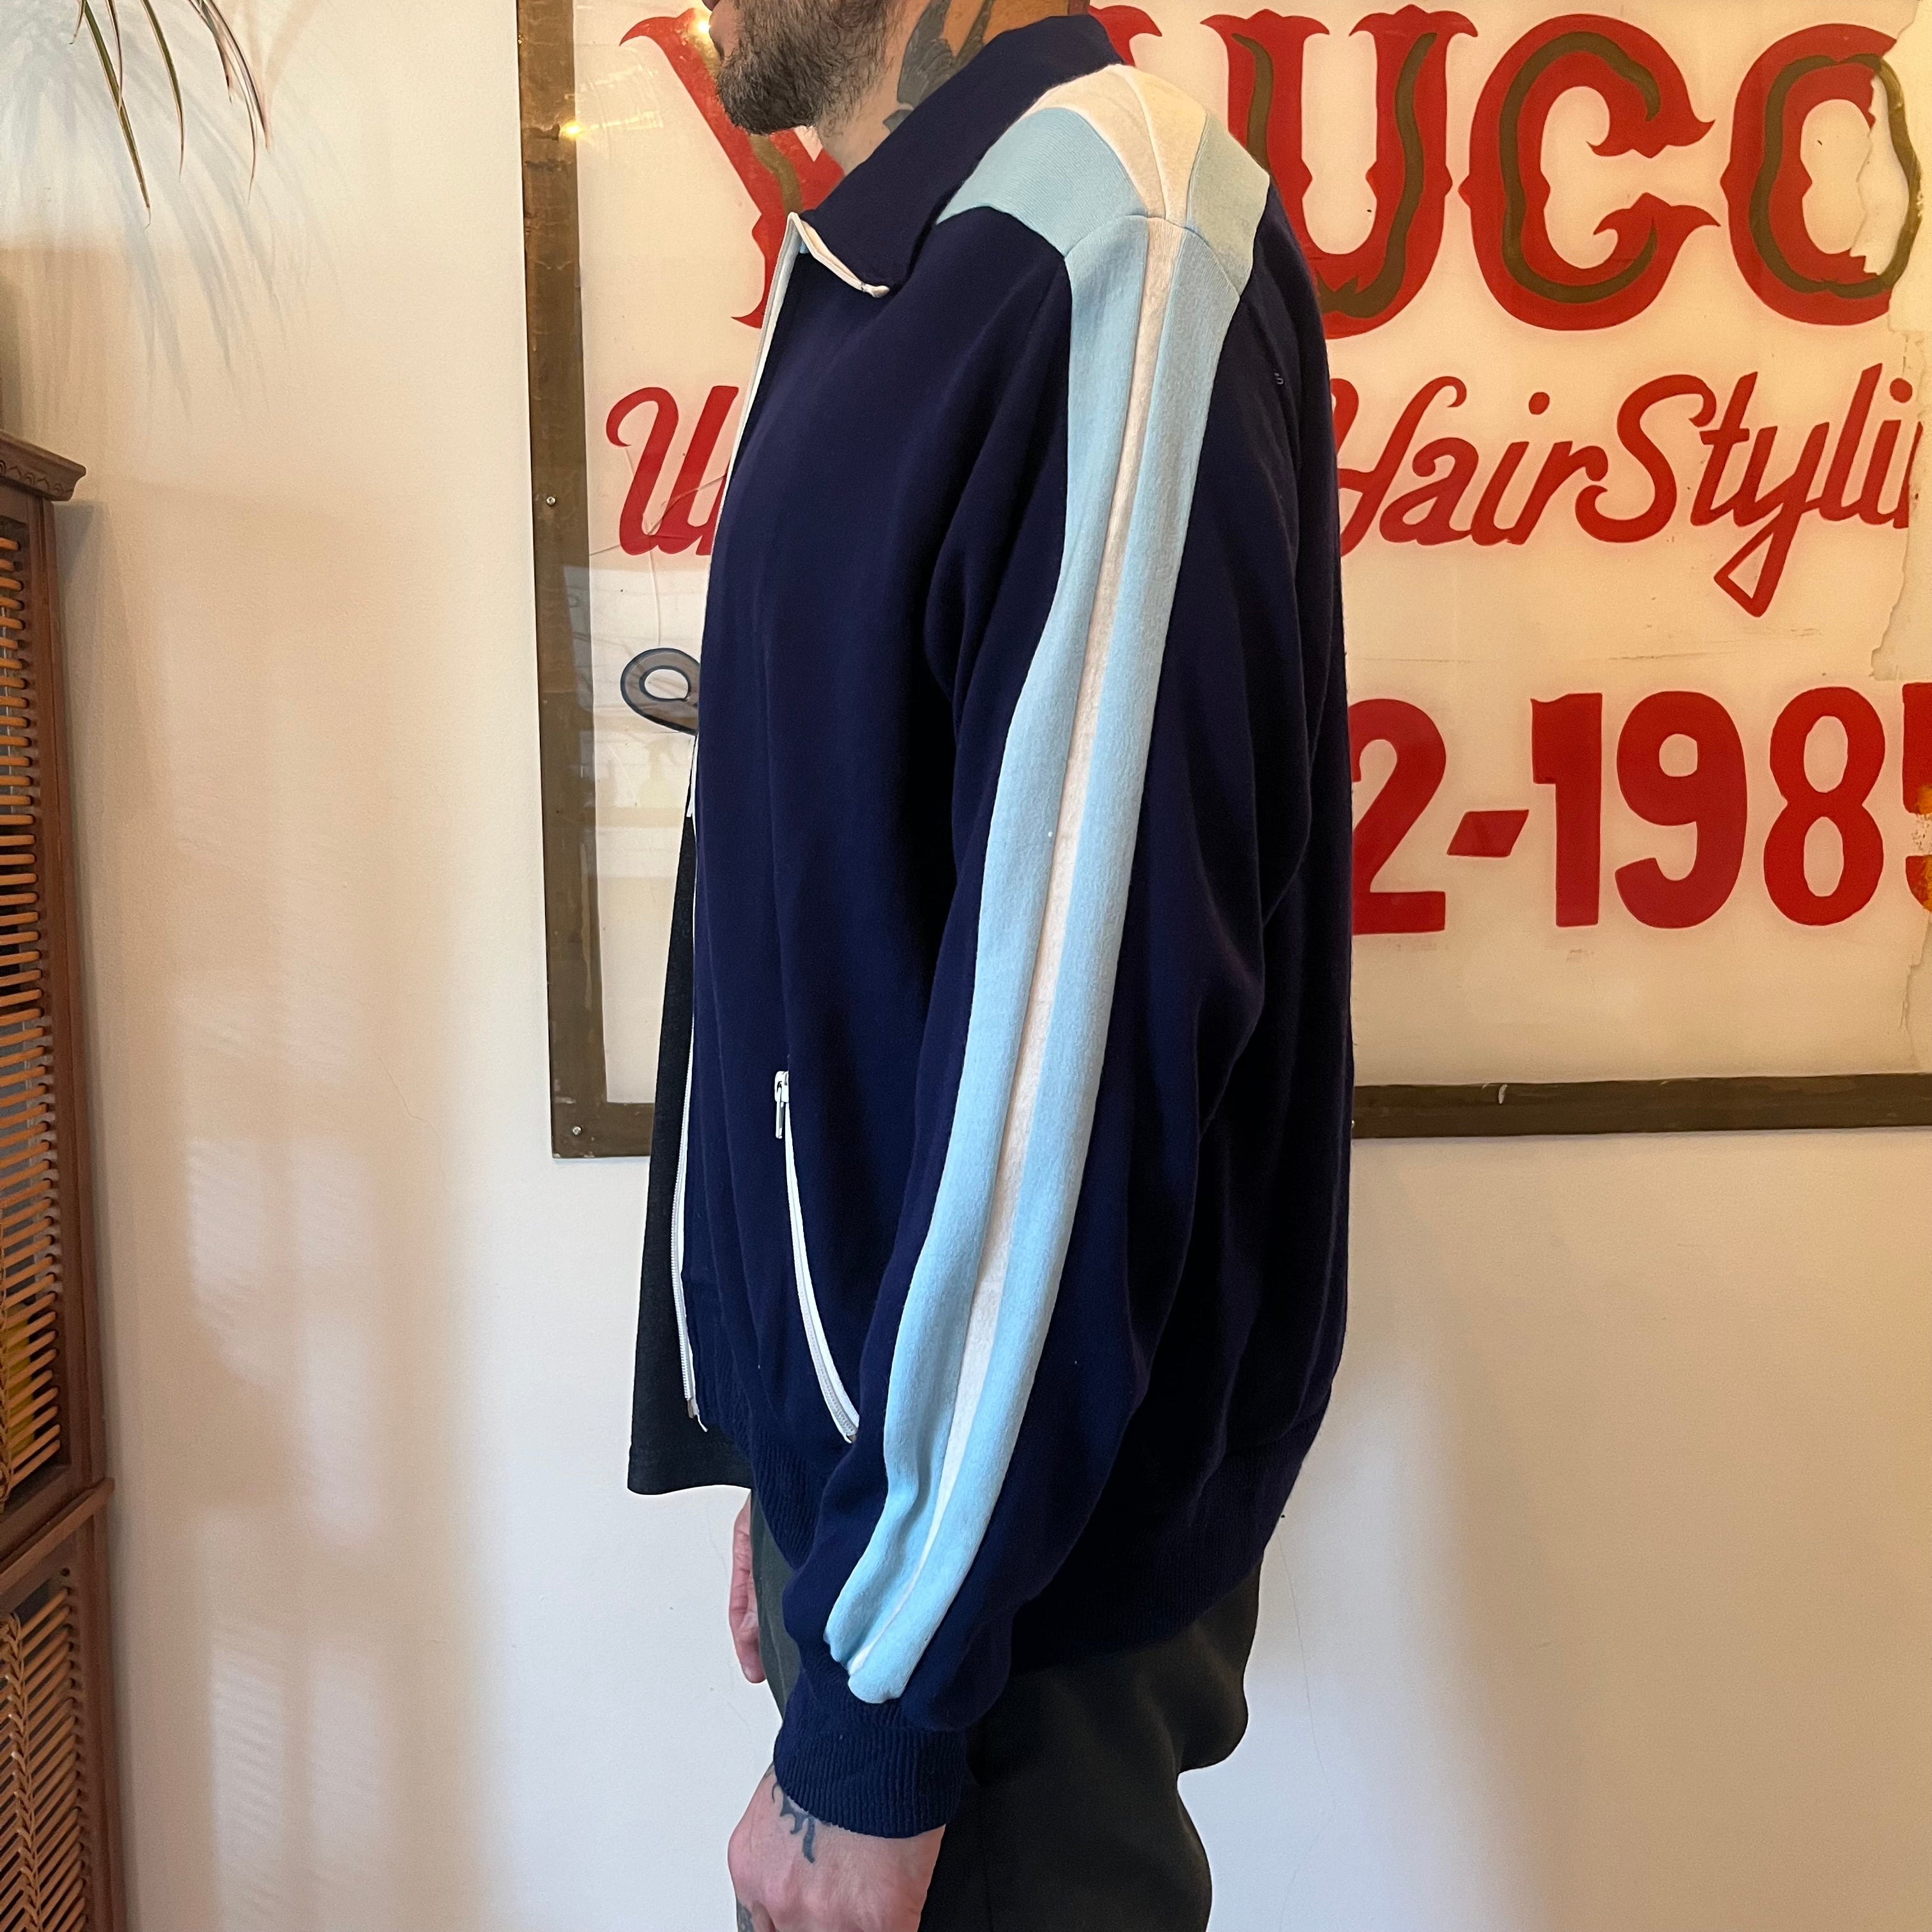 VINTAGE NAVY BLUE AND WHITE TRACK JACKET : REGAL ZIP FRONT